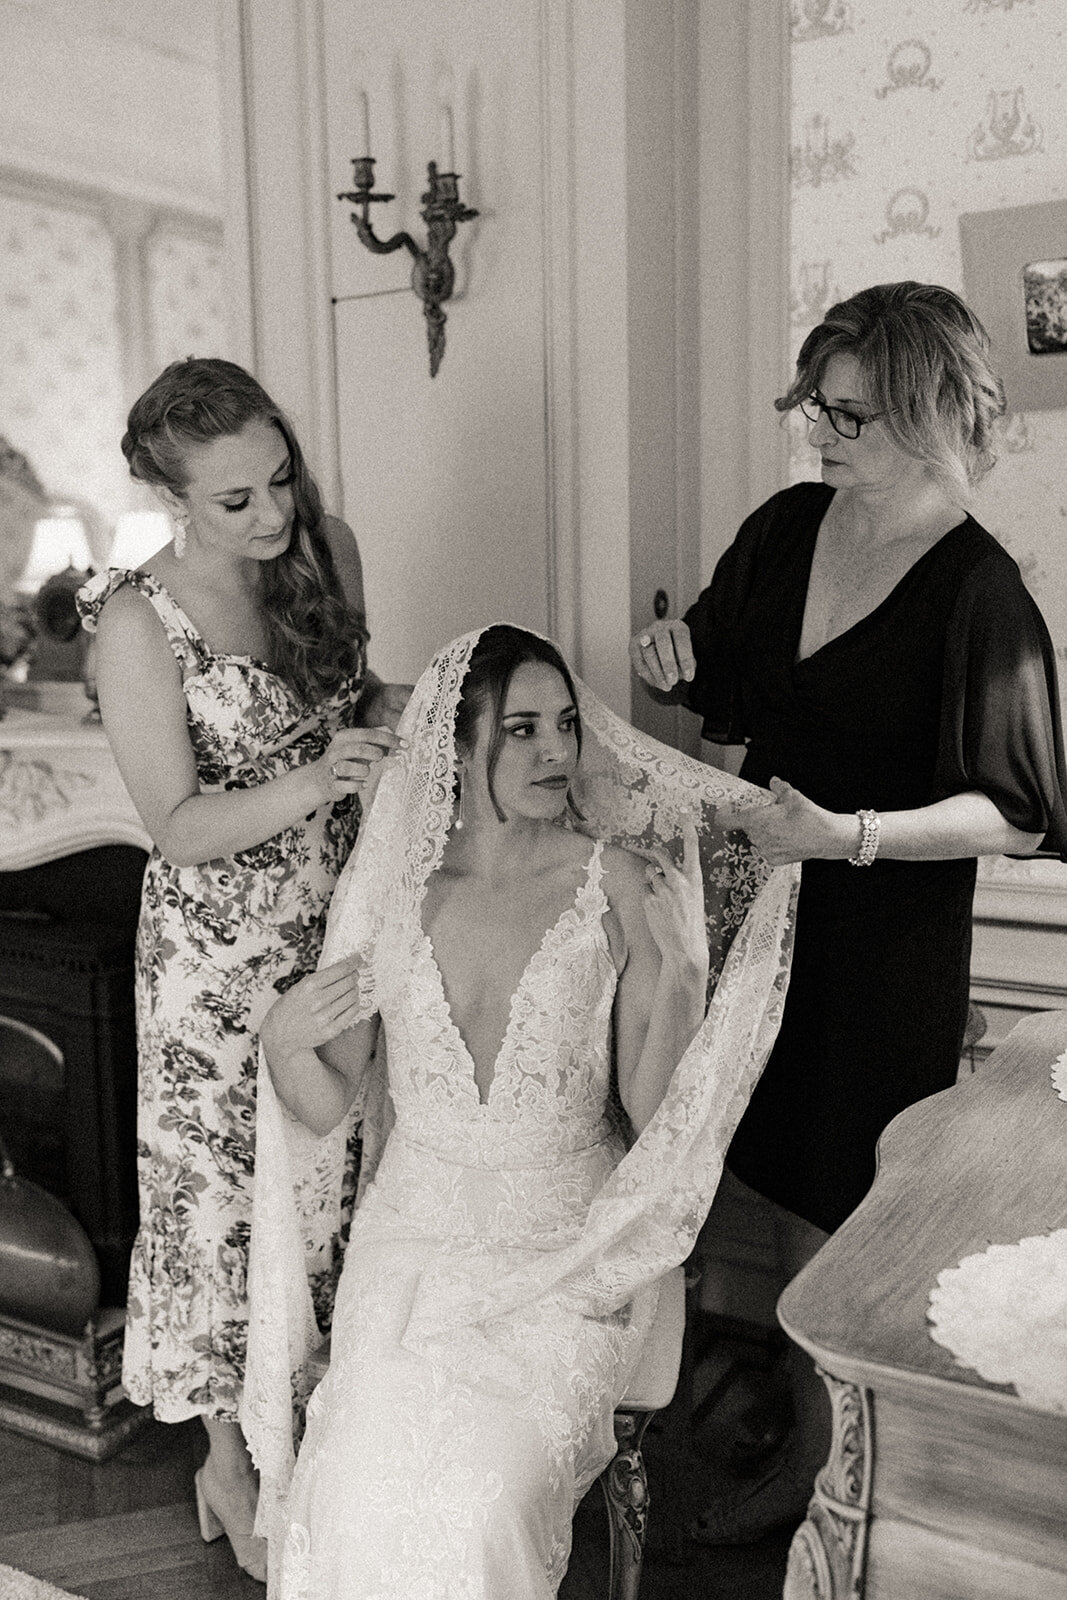 Mom and sister place an antique veil on the bride's head as she gets ready on her wedding day.